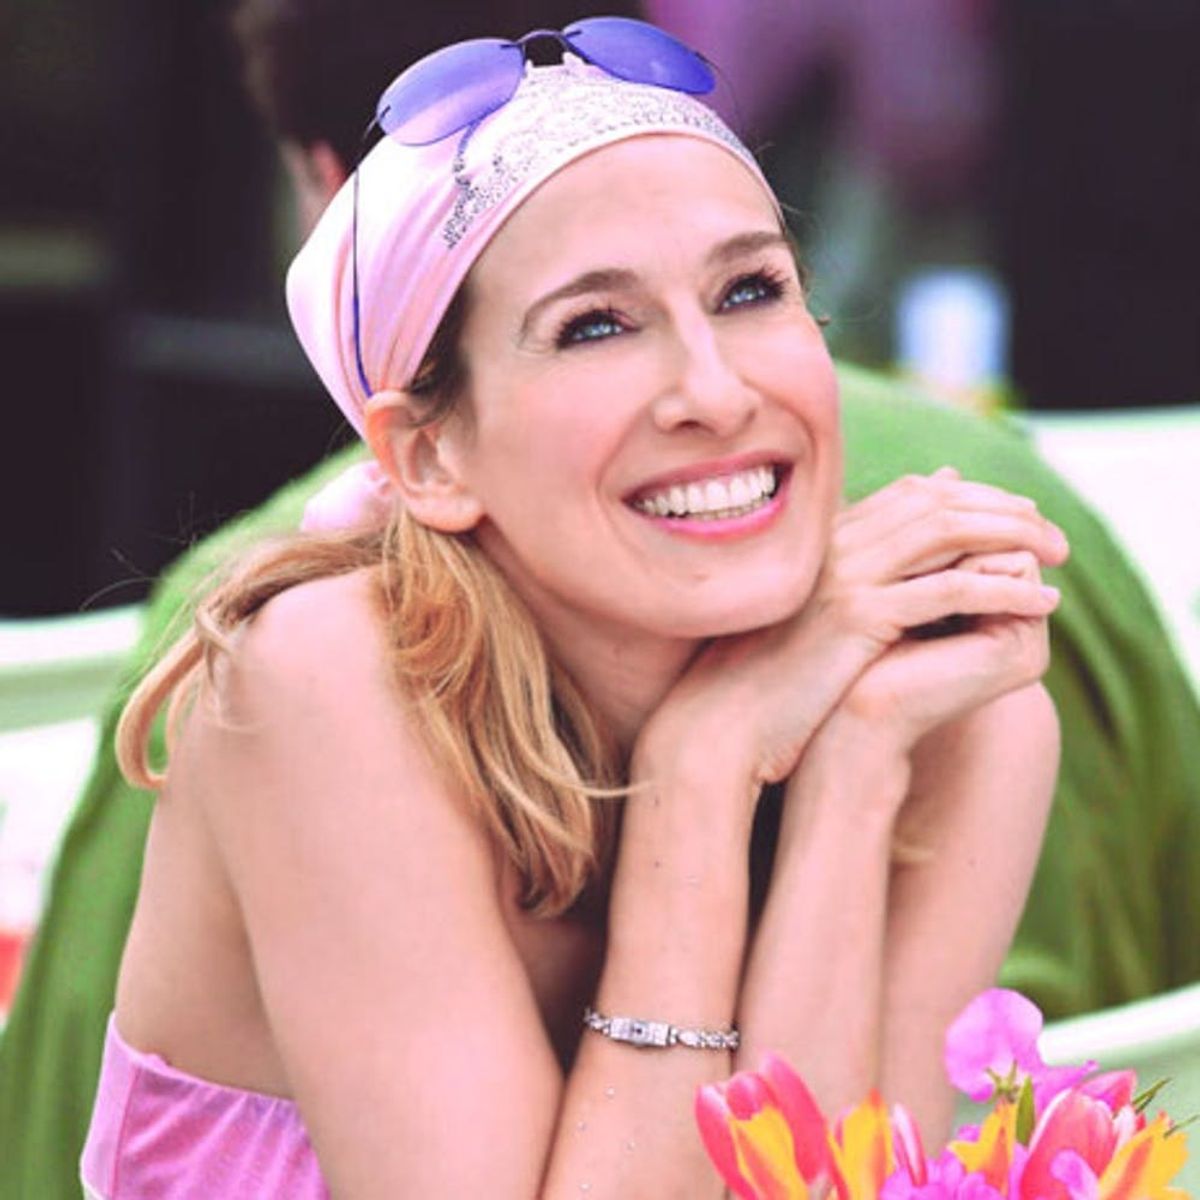 You’ll Be Surprised at What Sarah Jessica Parker Has to Say About Carrie Bradshaw